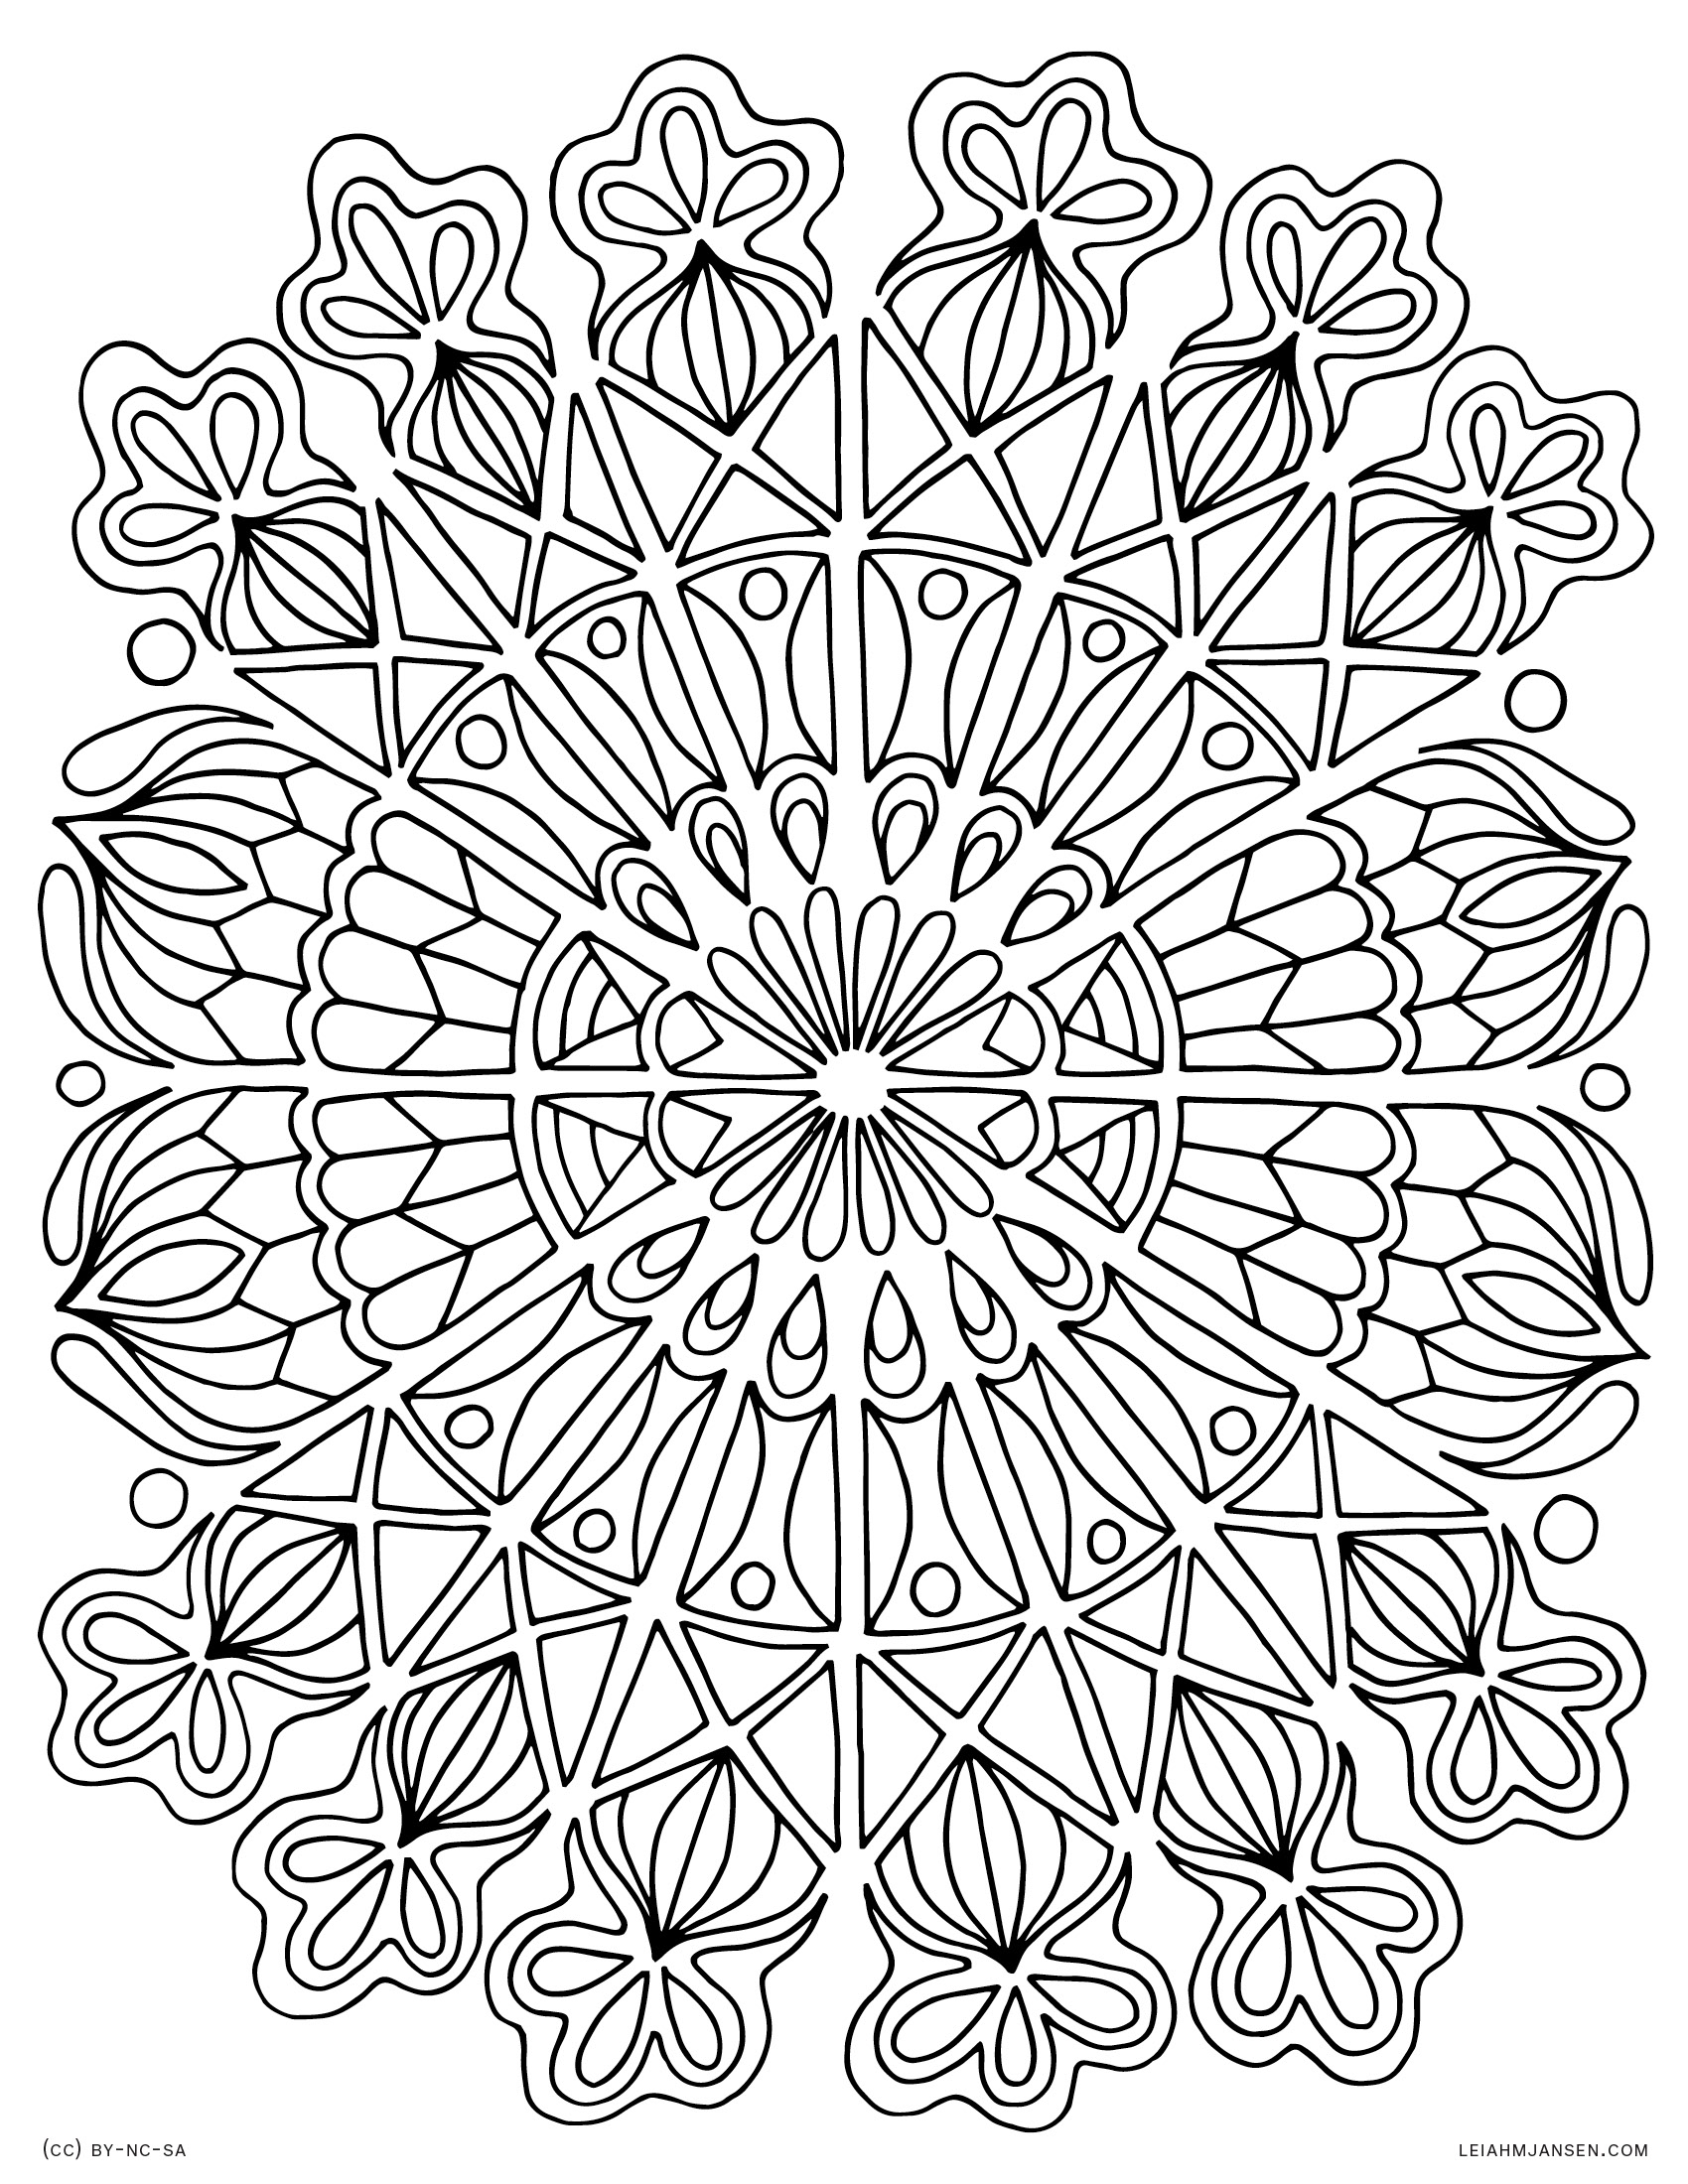 by Mandala Tapestry Tapestry Inspired Abstract Geometric Mandala Free Printable Coloring Page for Adults